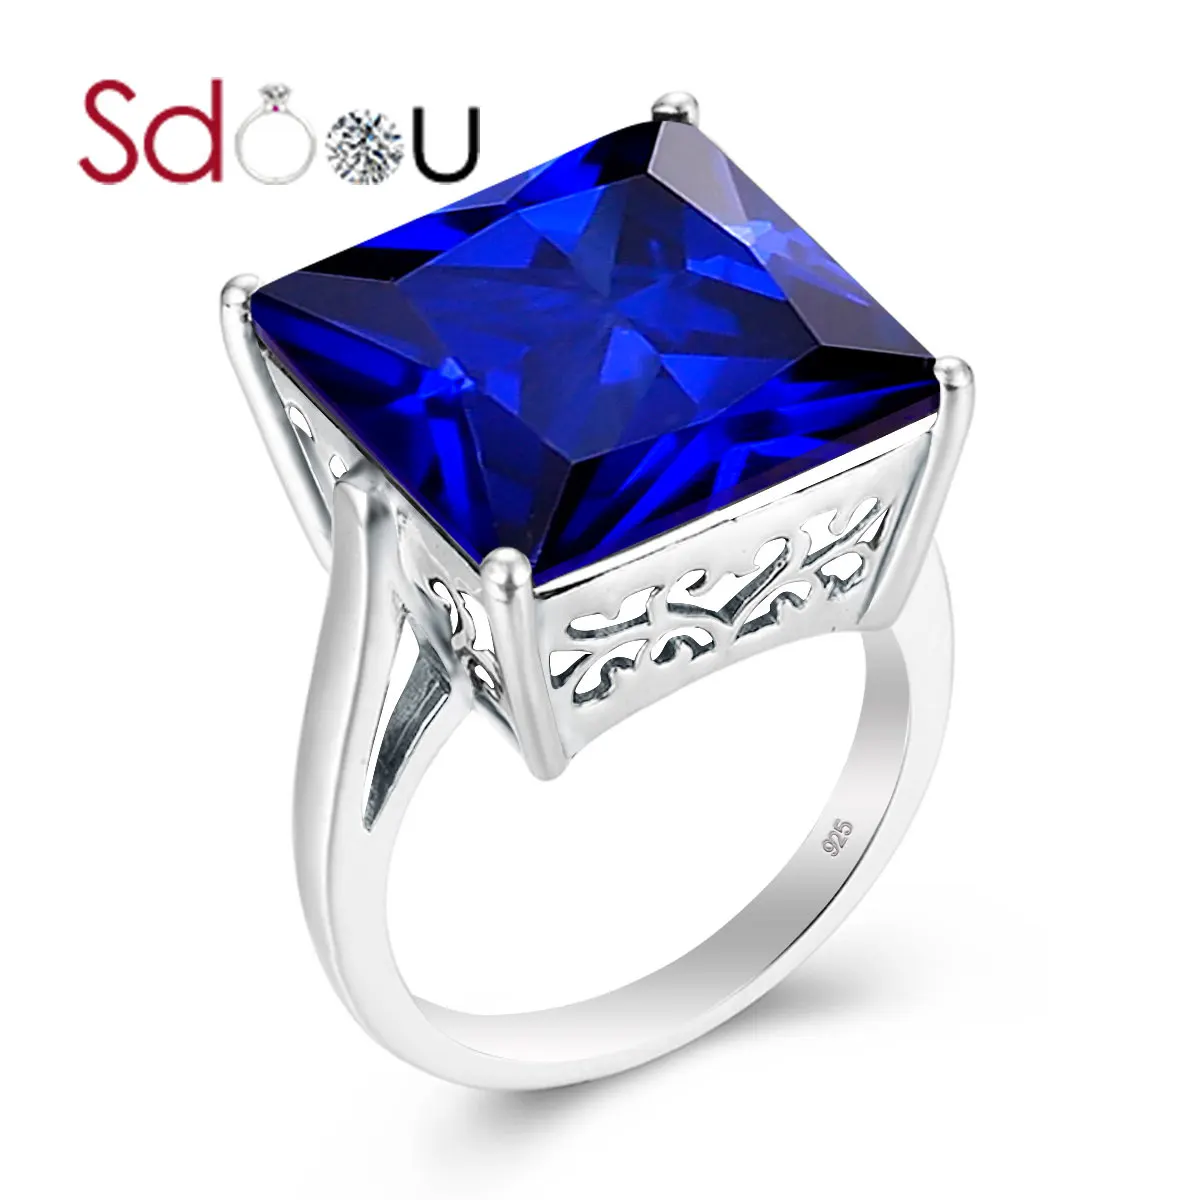 

SDOOU Silver Rings For Women Wedding Engagement Sterling Silver Ring Square Sapphire Gemstone Classic Fine Jewelry Original Gift